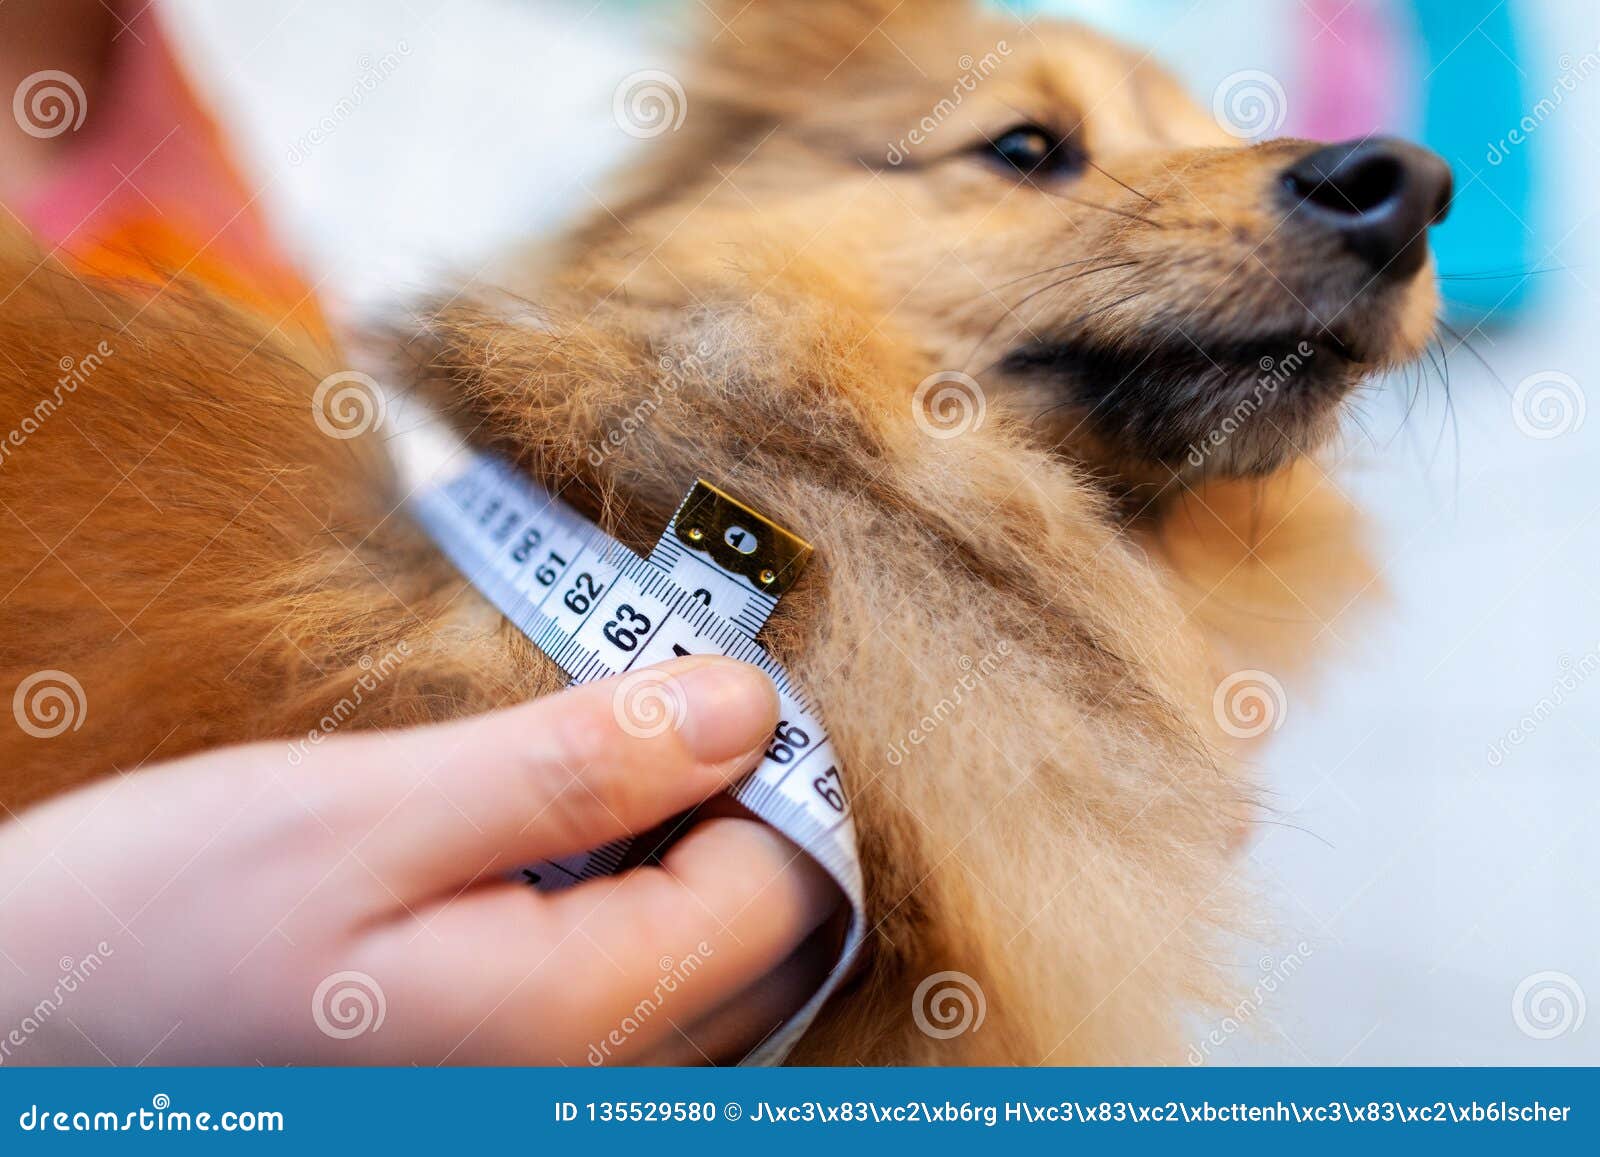 belly circumference is measured with a tape measure on a dog